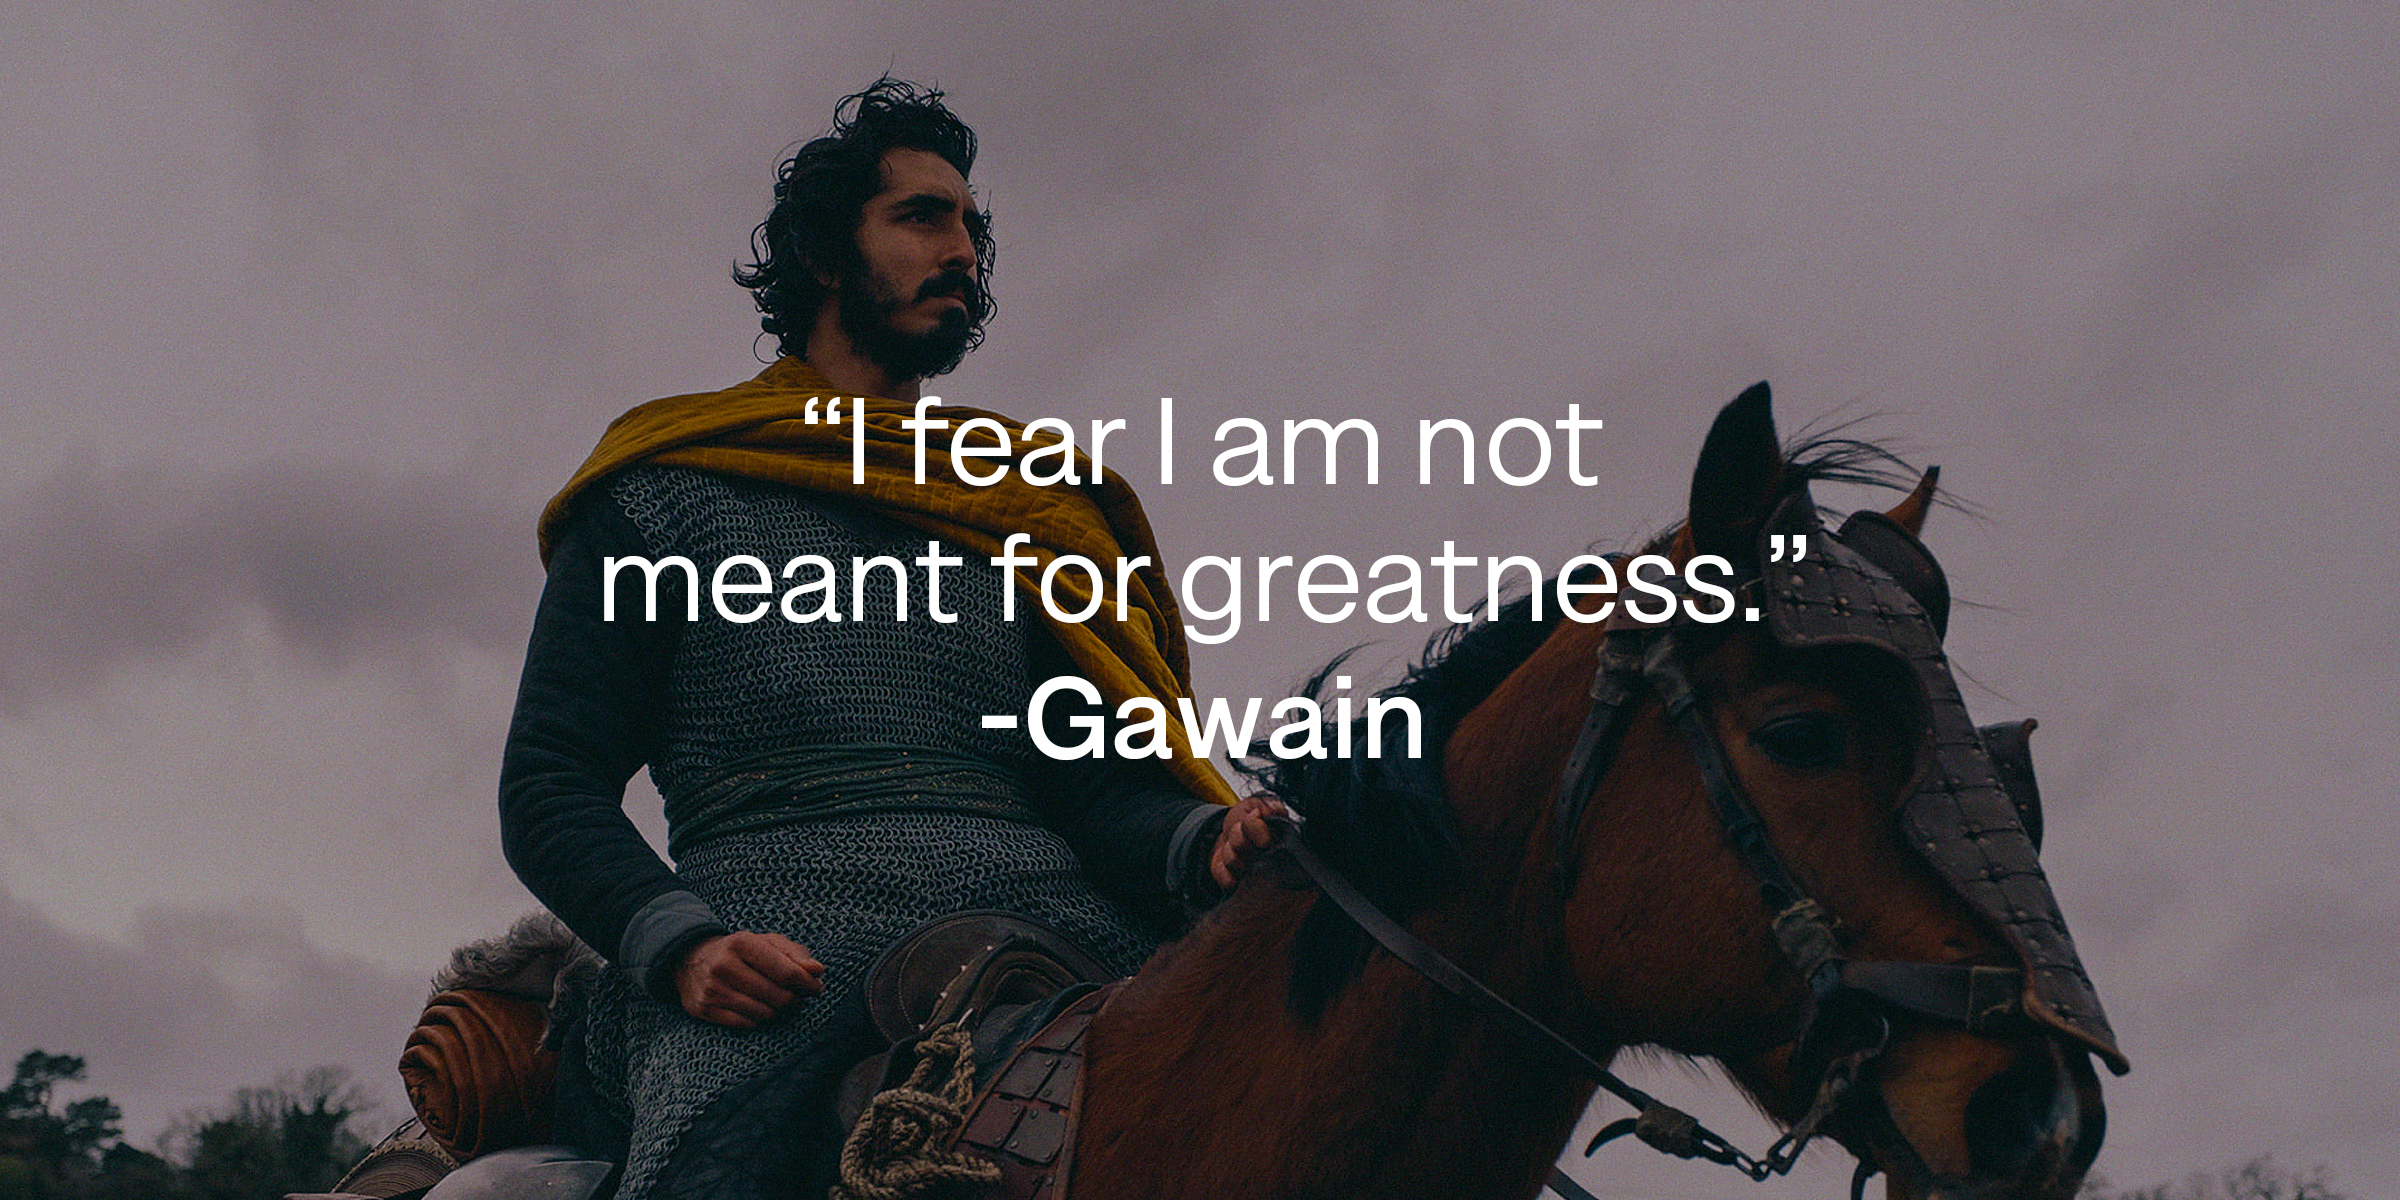 Gawain with his quote: "I fear I am not meant for greatness." | Source: facebook.com/TheGreenKnight